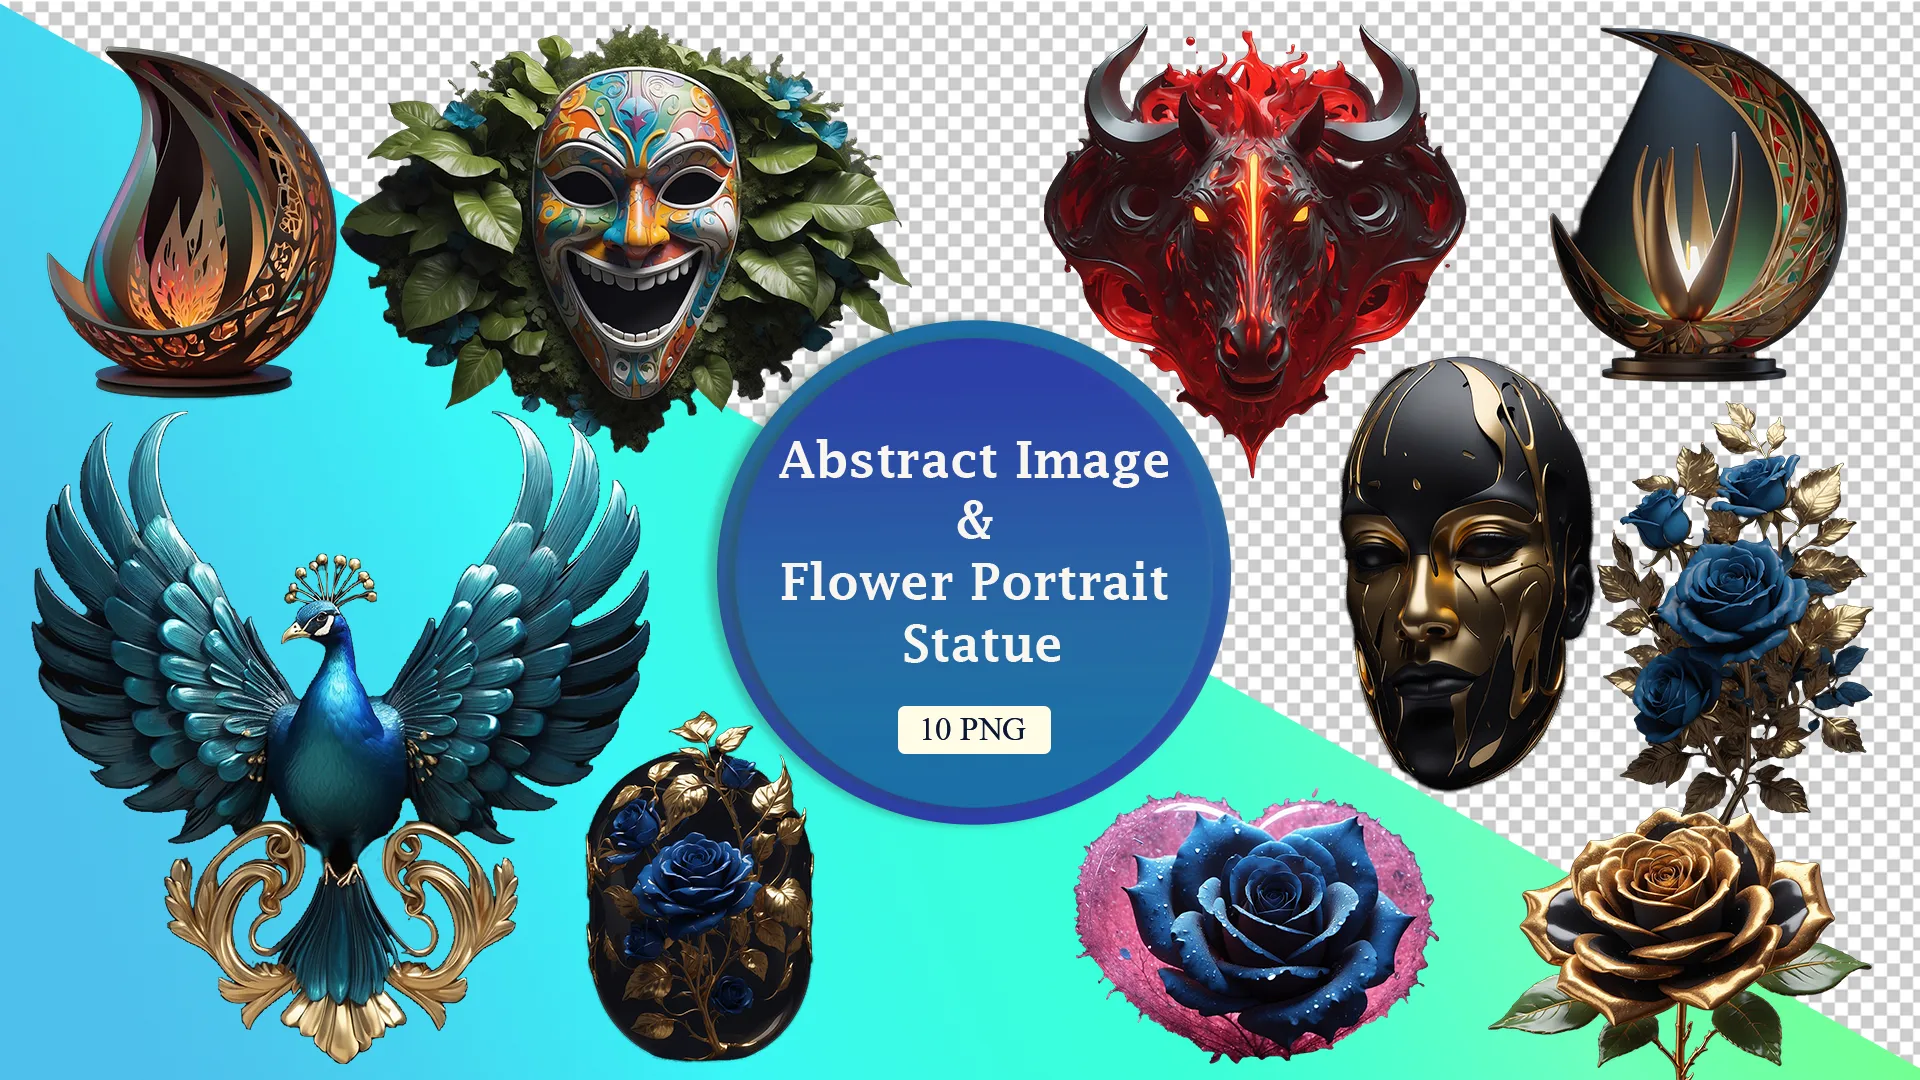 Majestic Peacock and Floral Portrait Statue 3D Pack